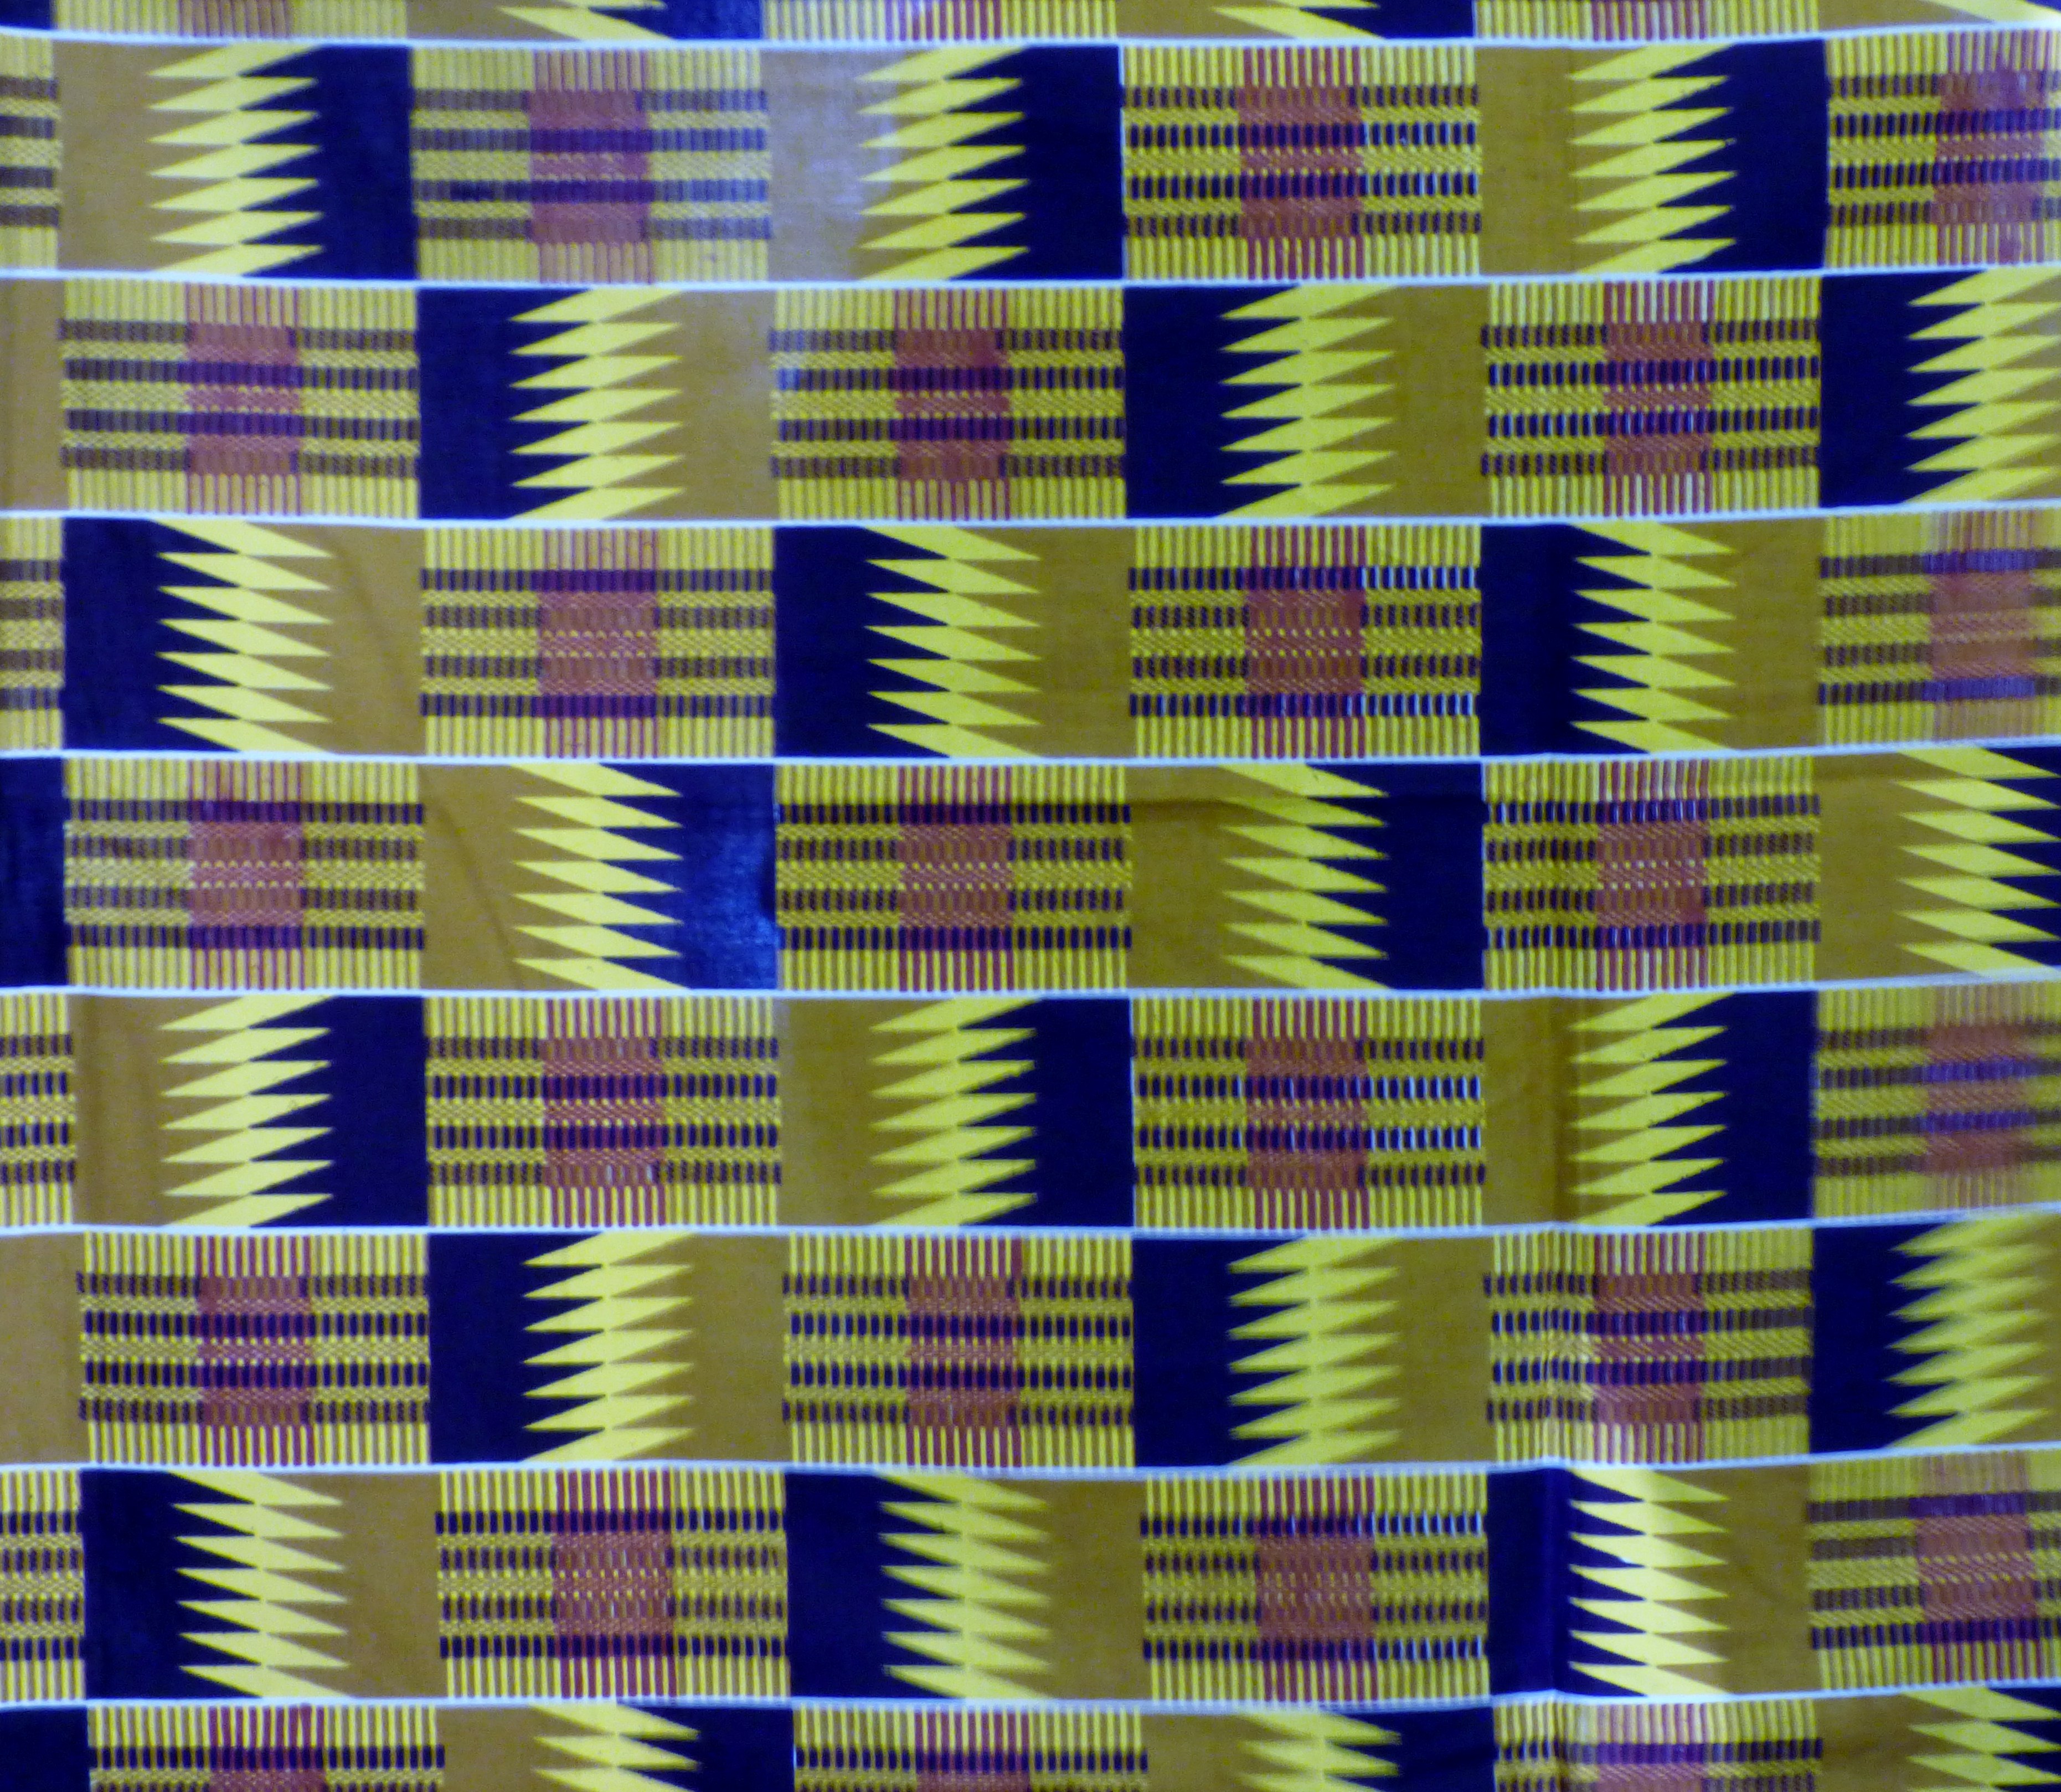 West African strip cloth shown by Magi Relph